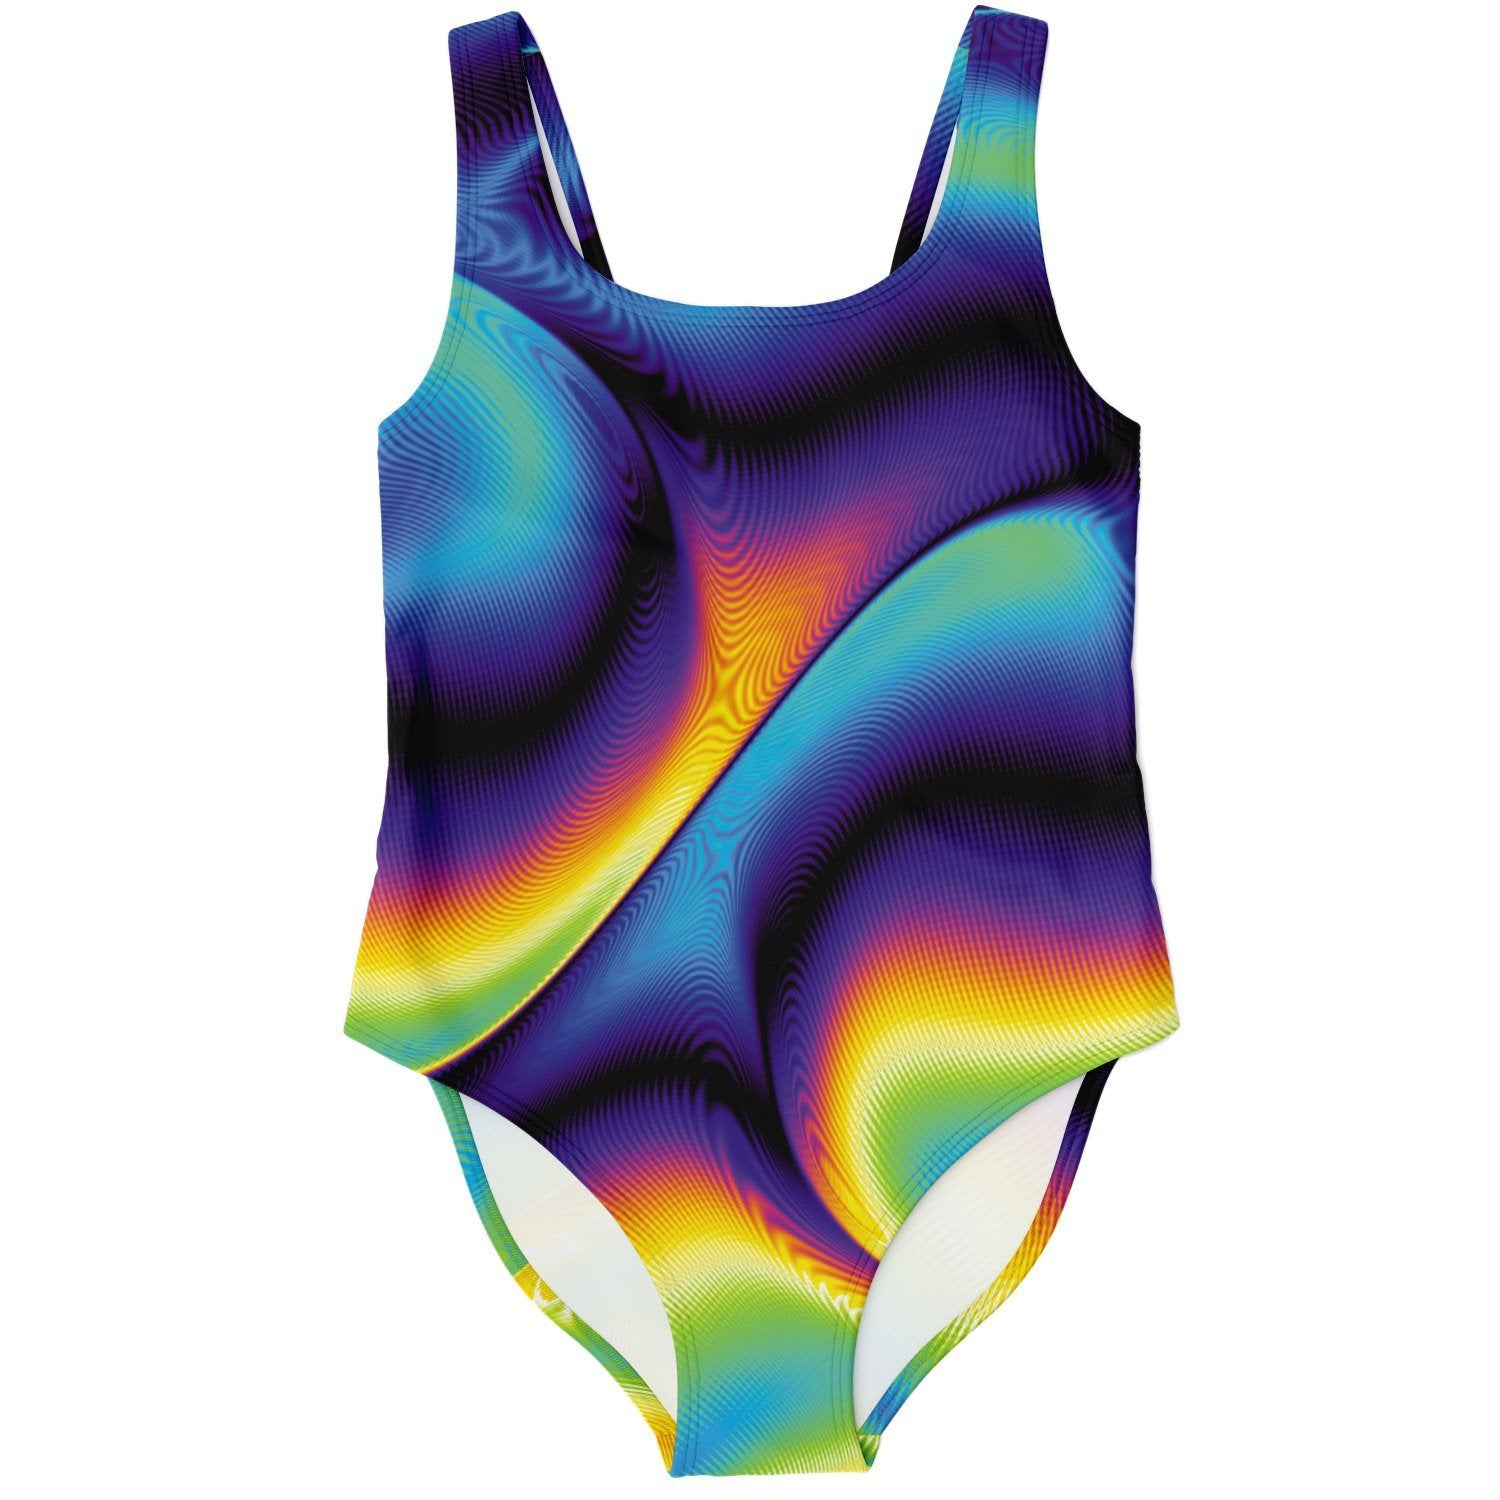 Abstract Psychedelic Festival One Piece Swimsuit - kayzers